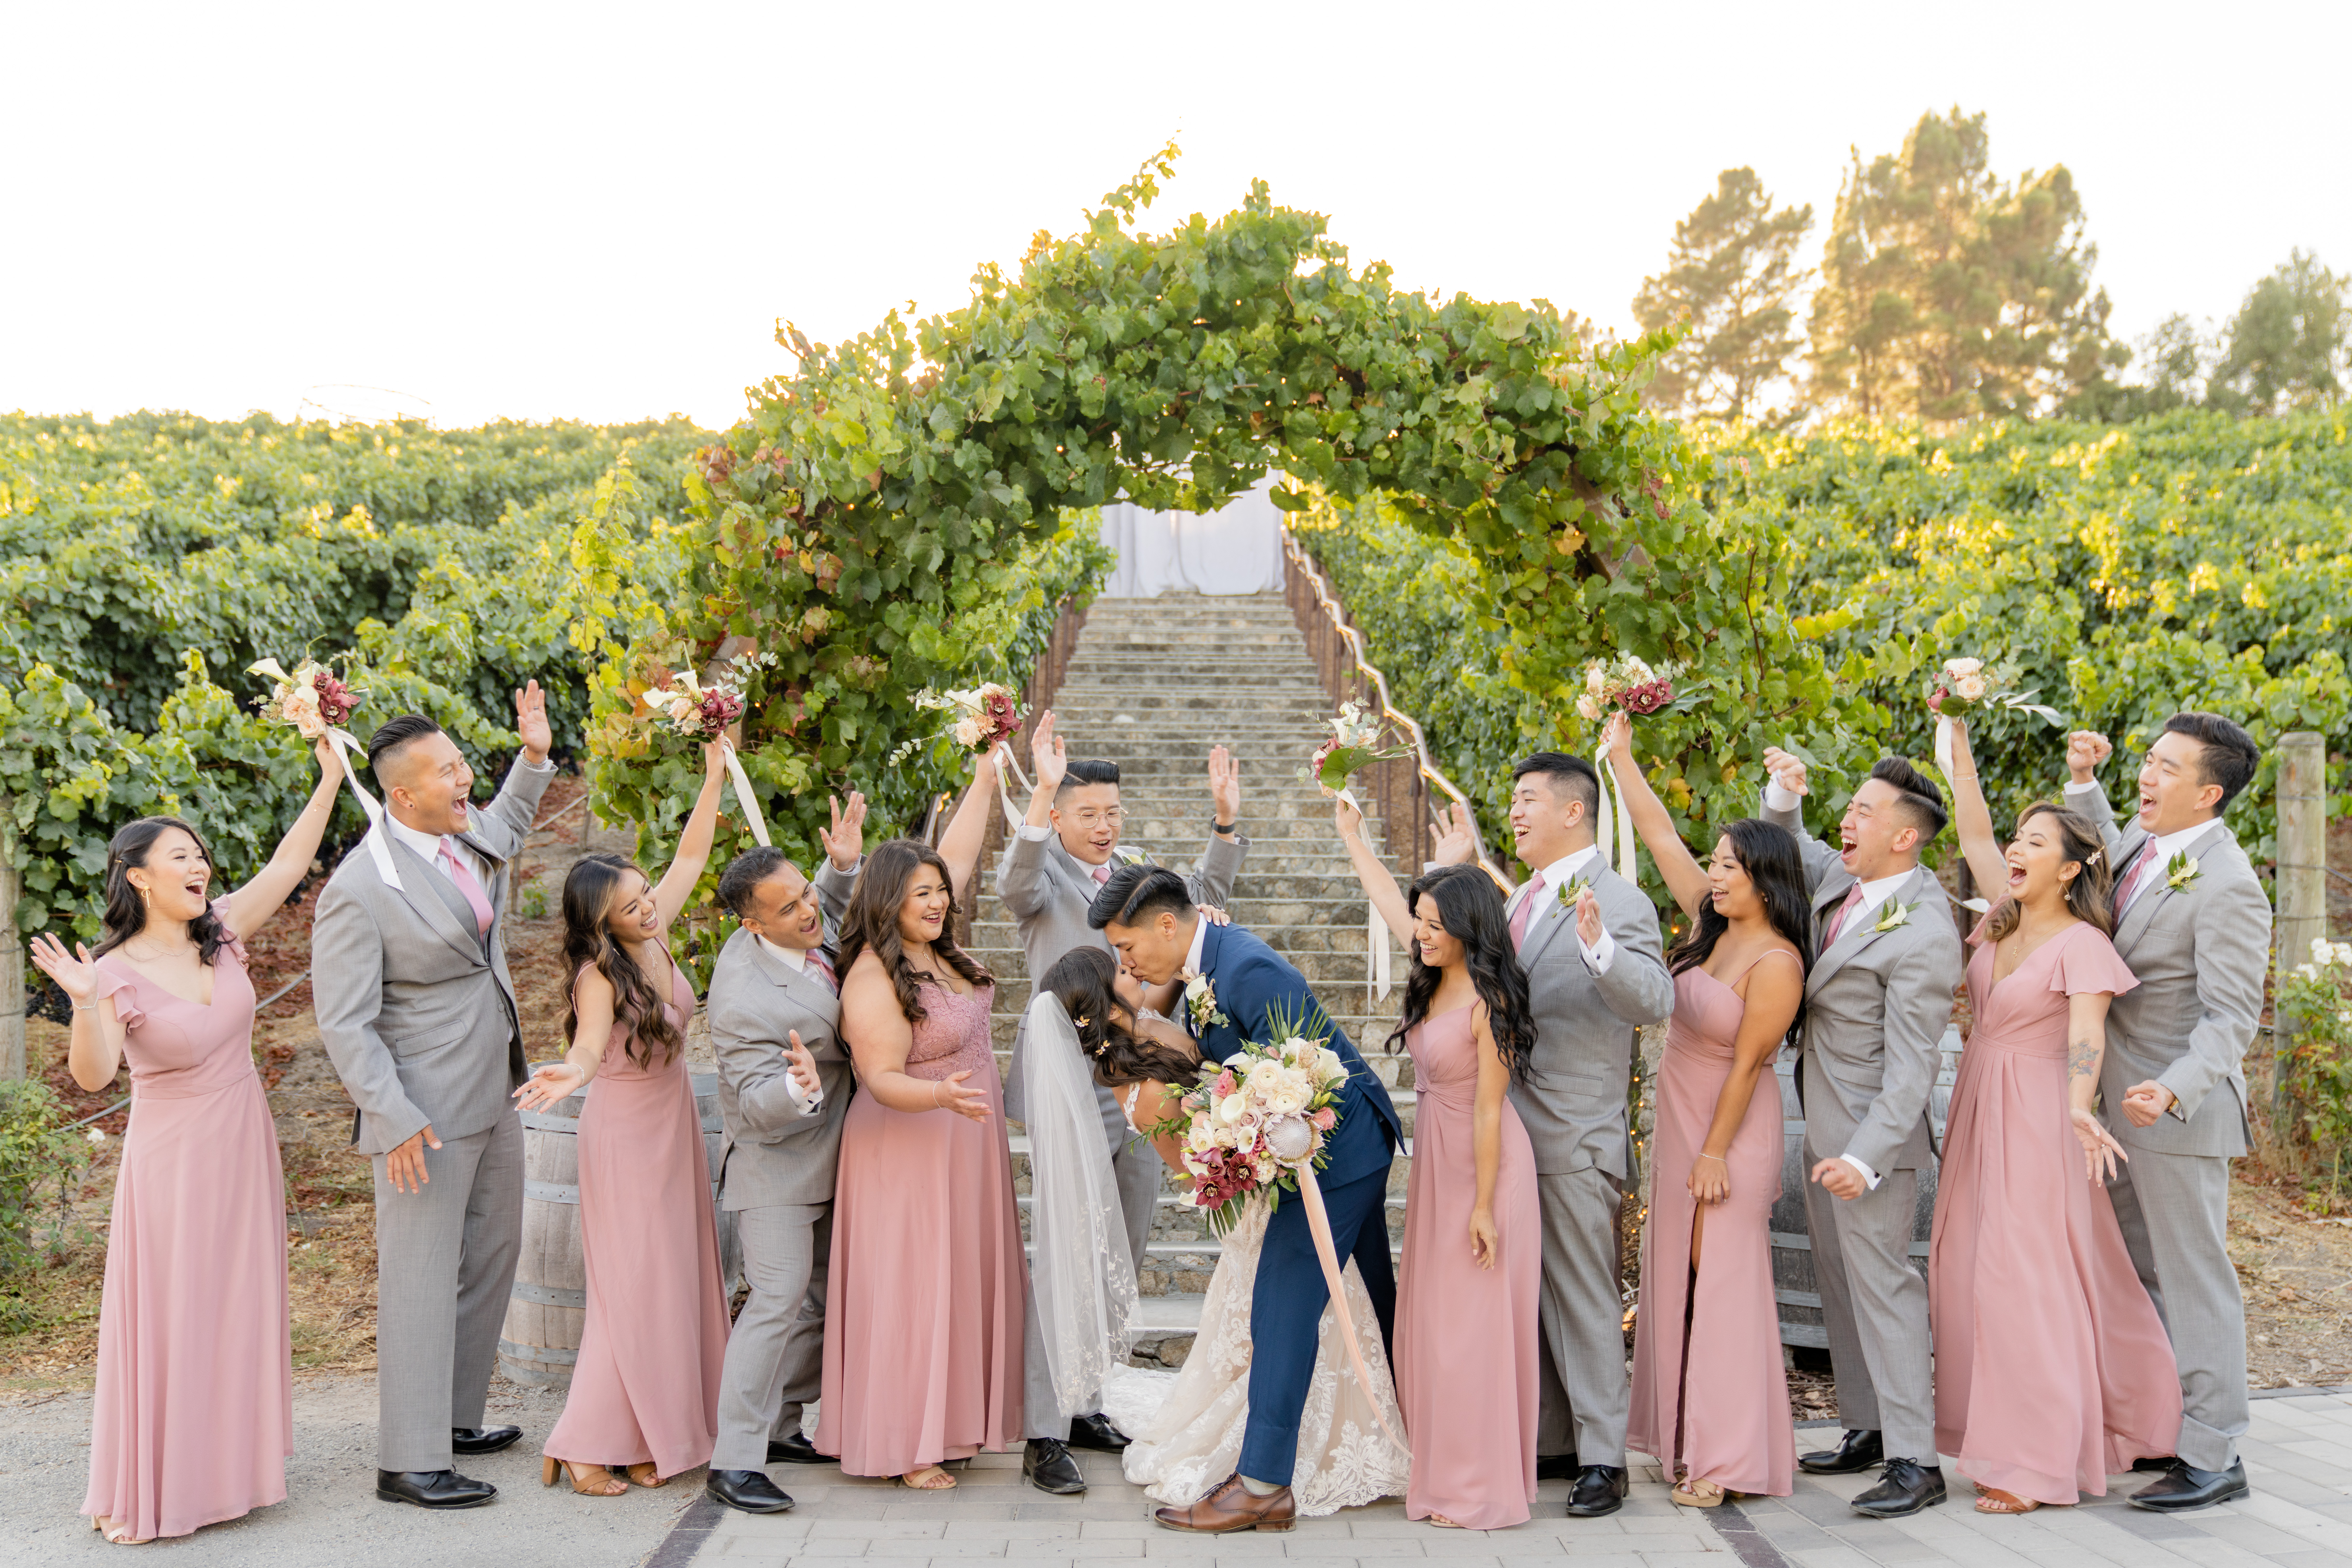 newlyweds share an epic kiss under vineyard arch surrounded by their wedding party cheering them on